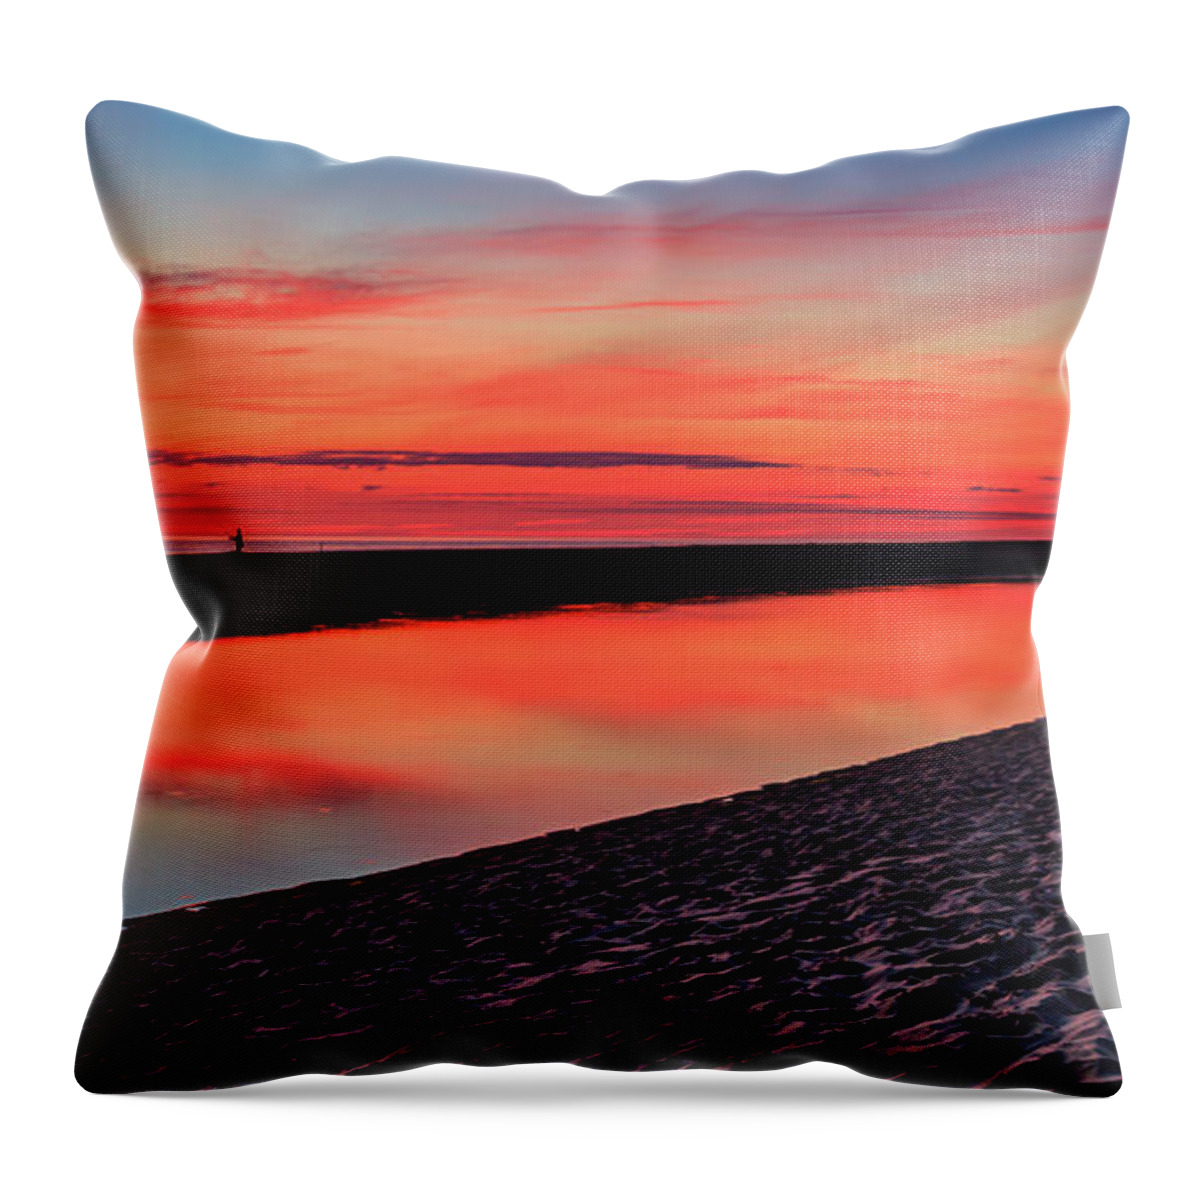 Seascape Throw Pillow featuring the photograph Hanging Valley Sunrise by David Lee